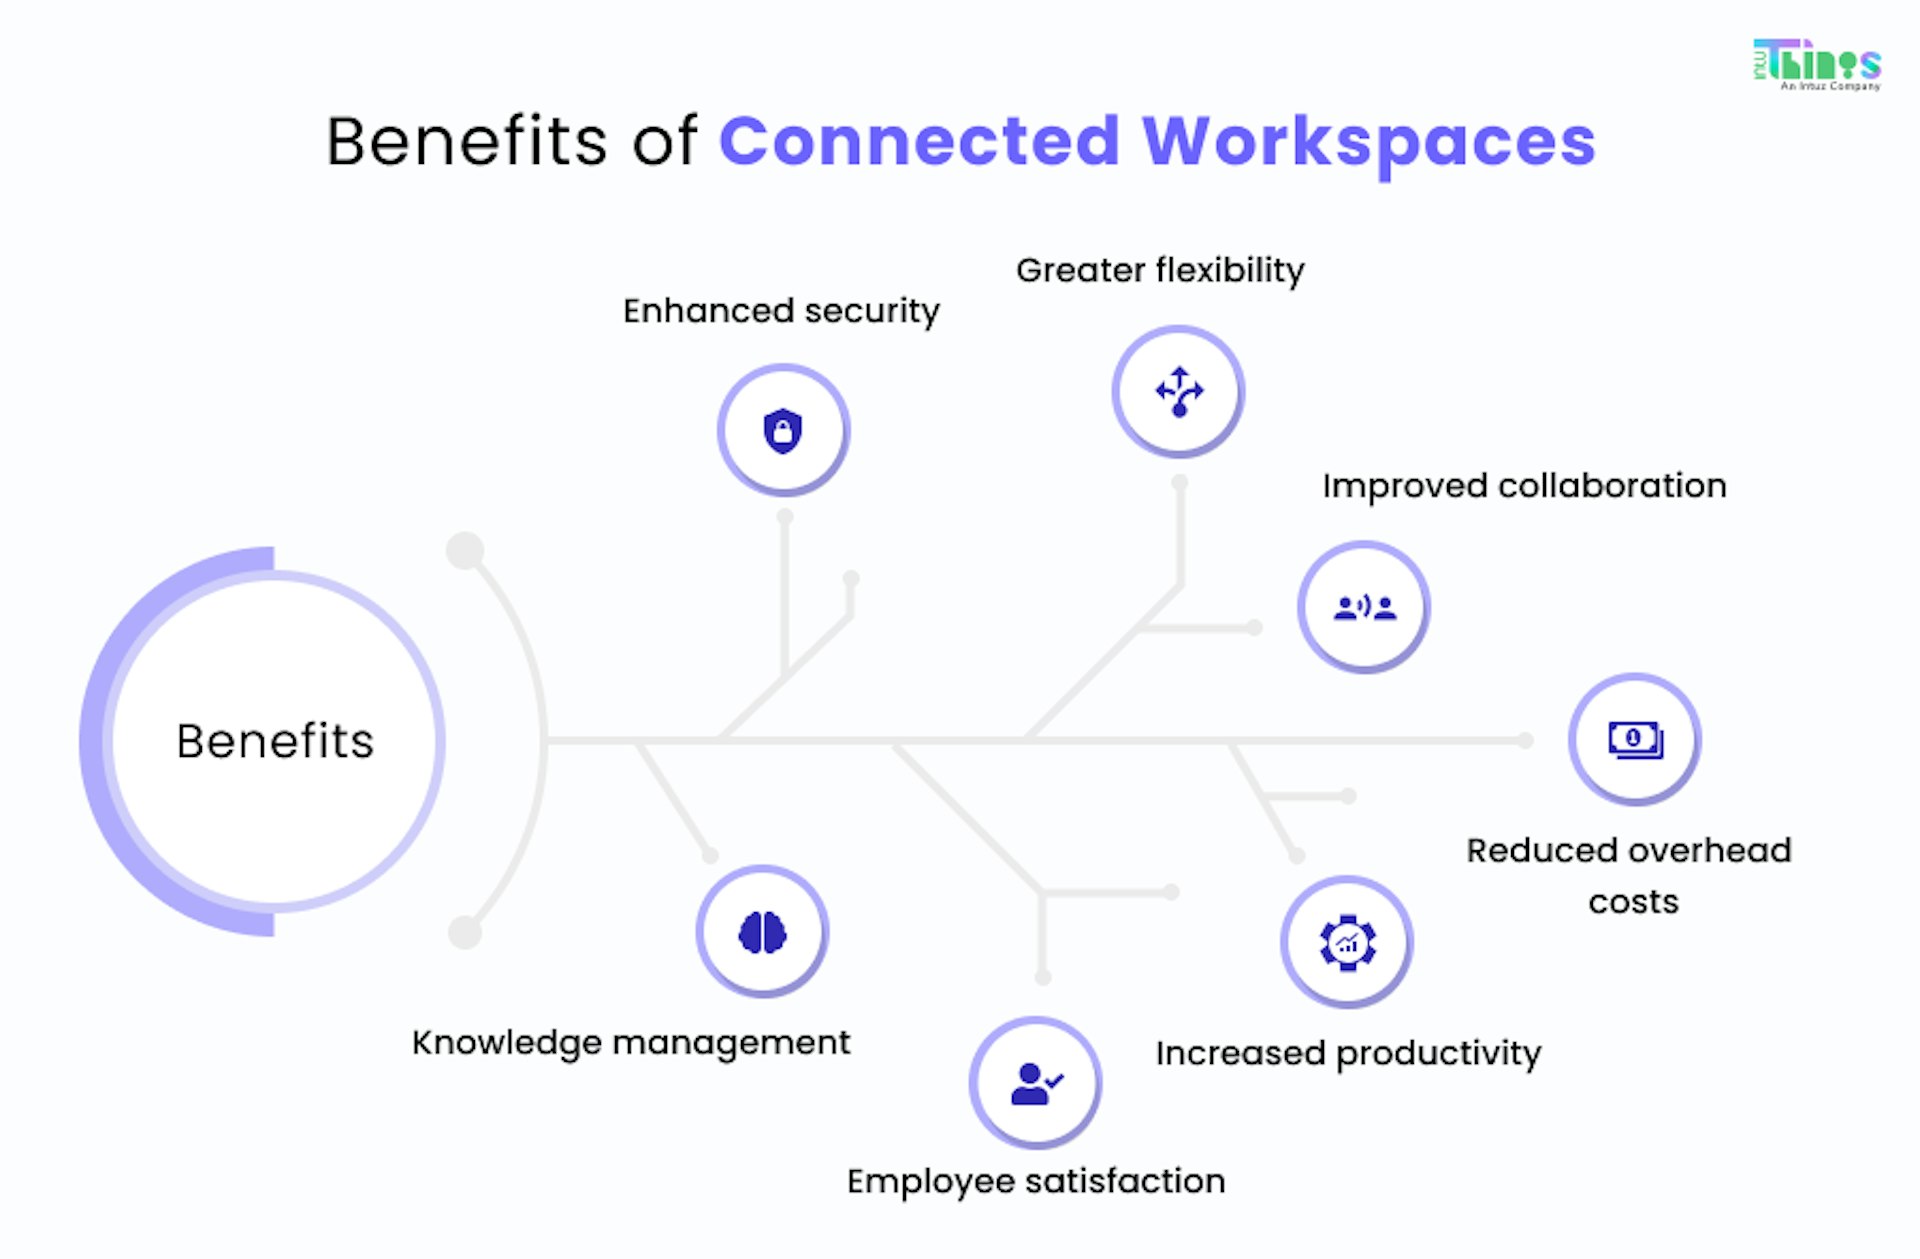 Benefits of connected workspaces